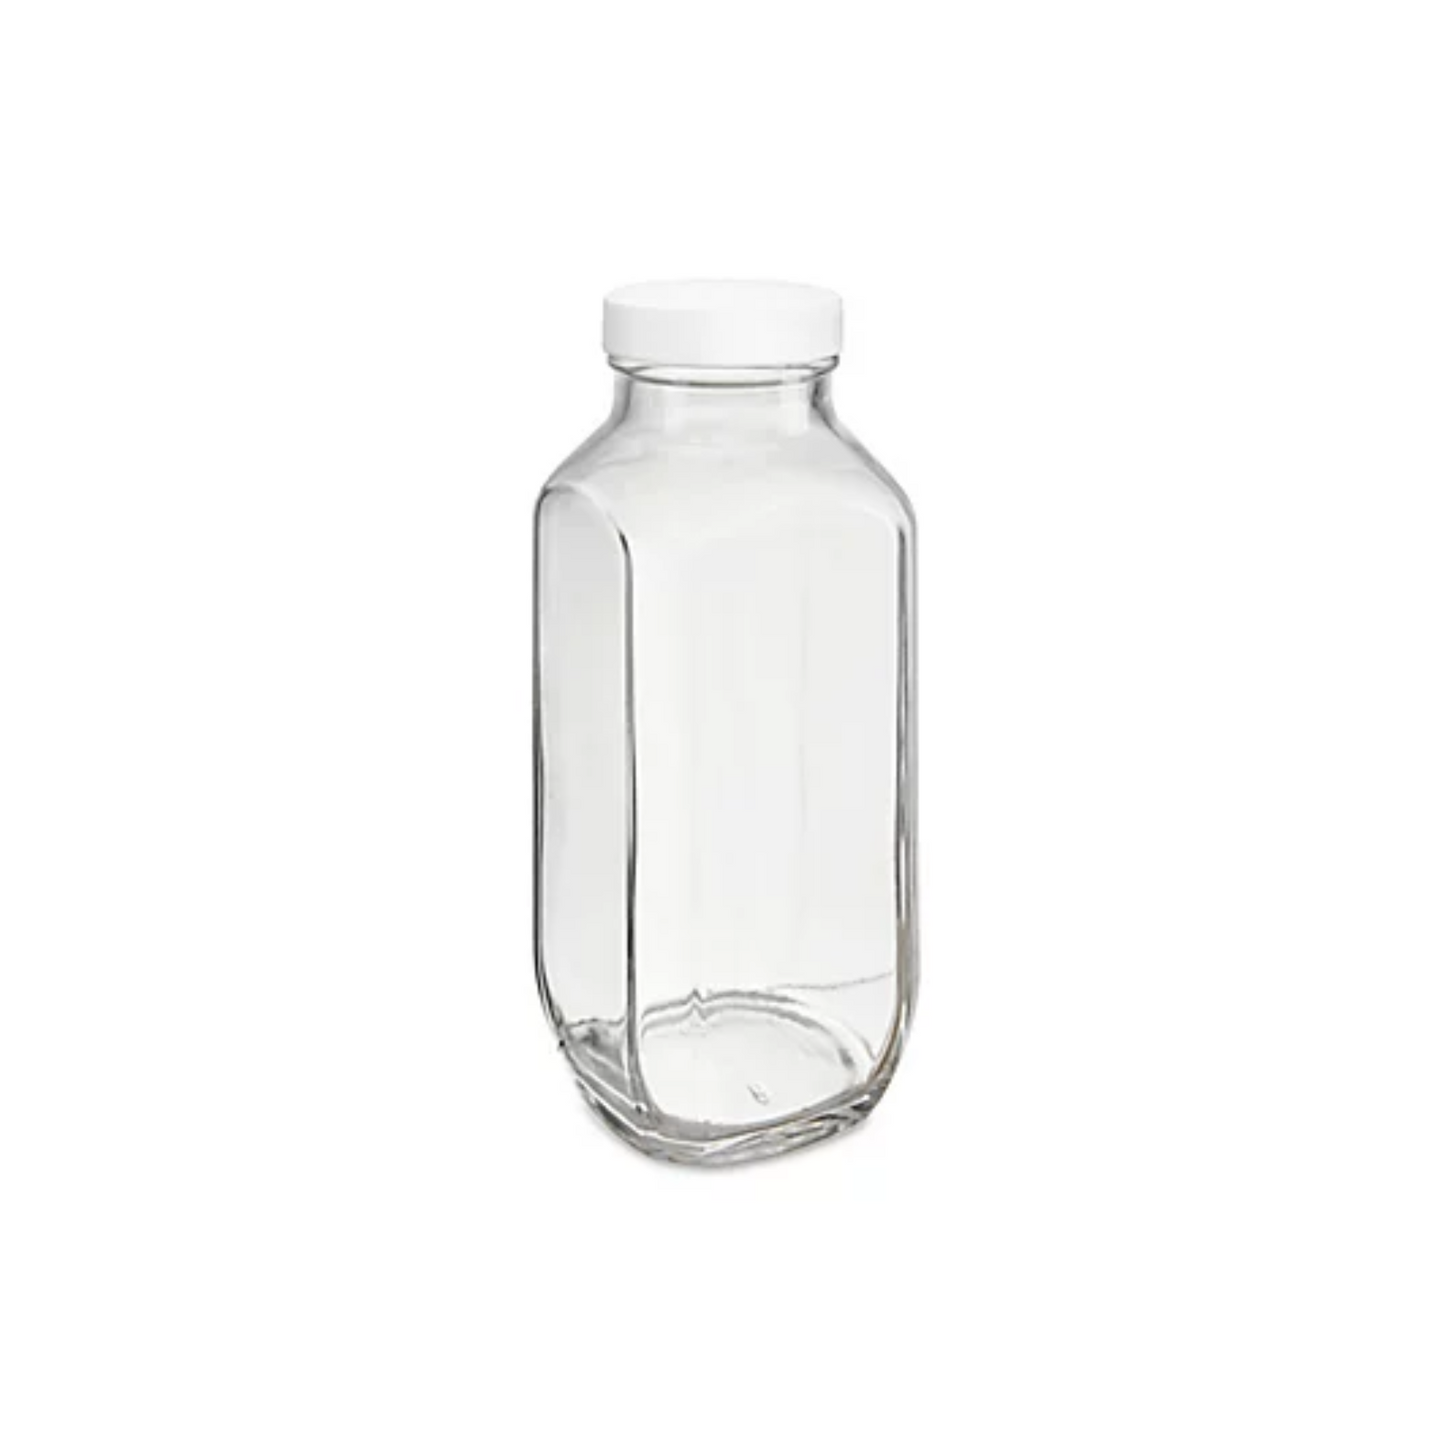 French Square Glass Jars With Lid 16 Oz